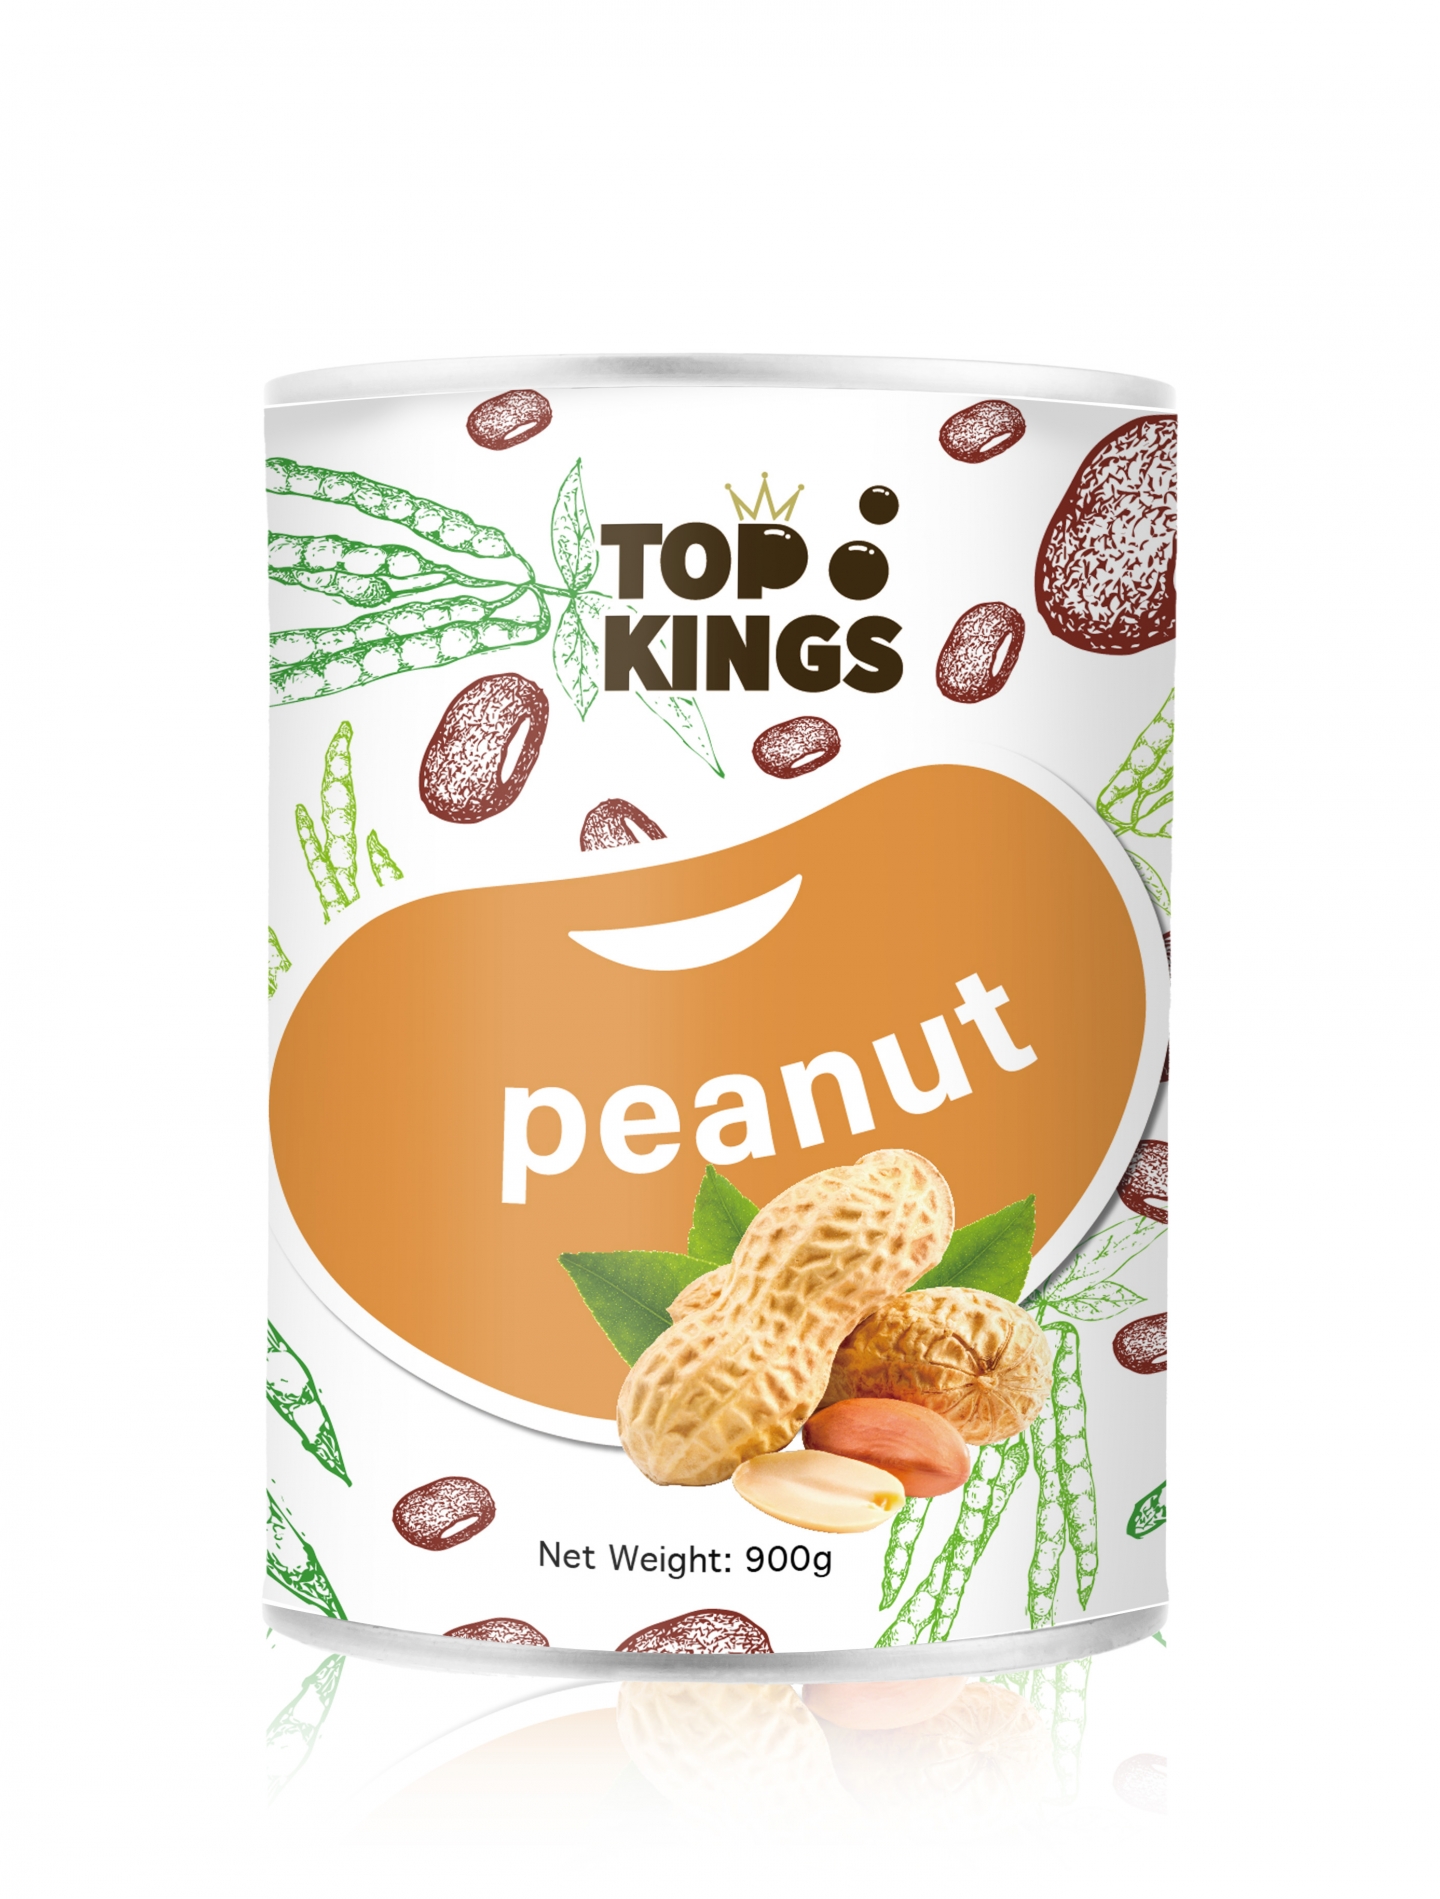 Topkings Canned Toppings